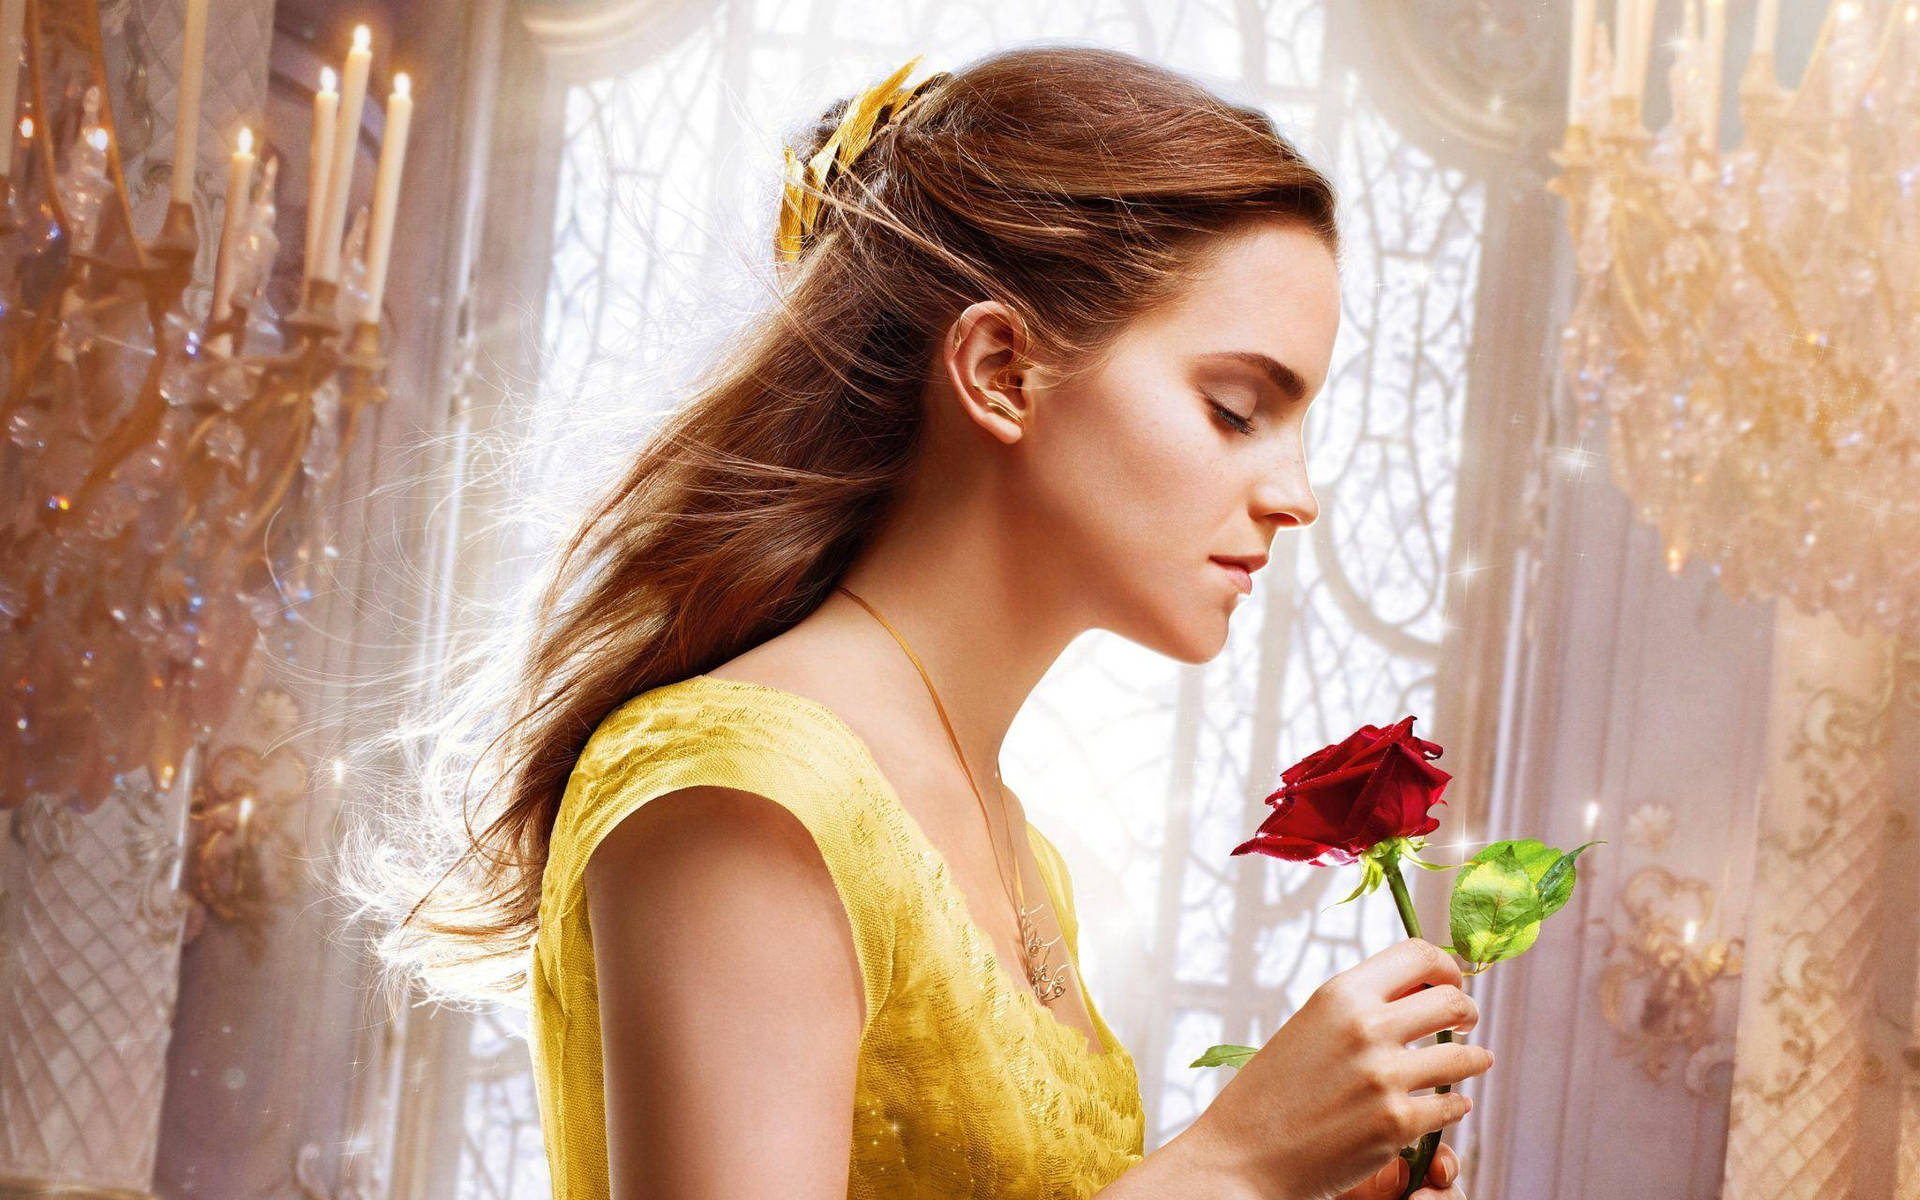 Emma Holding Beauty And The Beast Rose